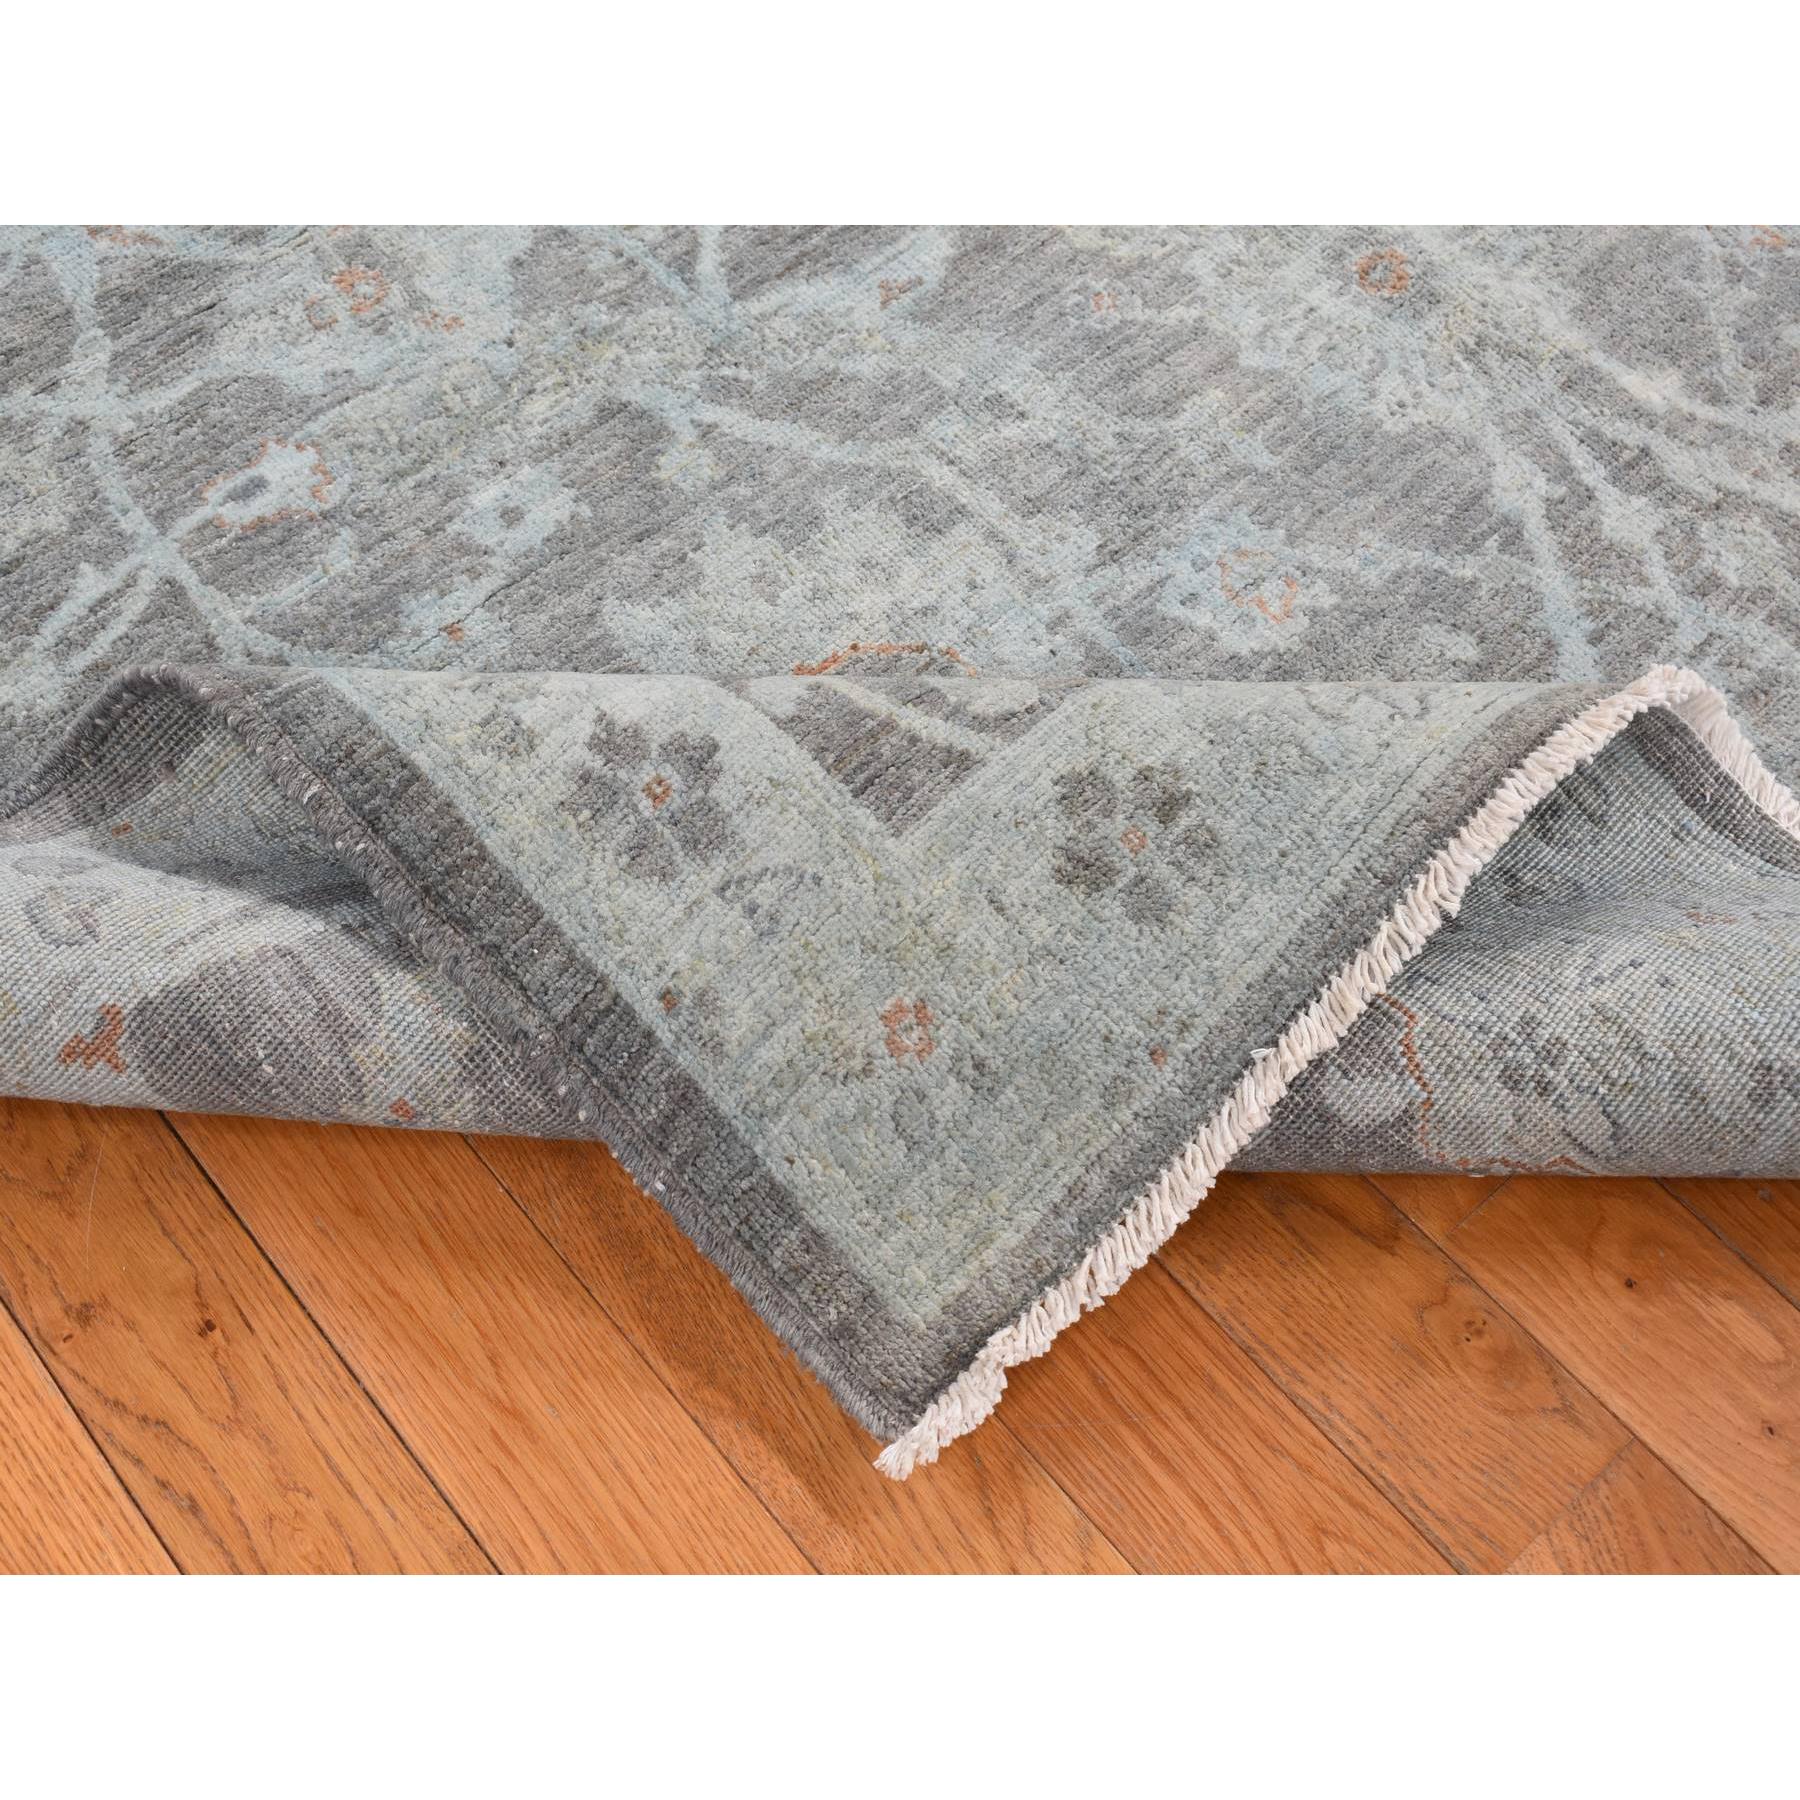  Wool Hand-Knotted Area Rug 5'9